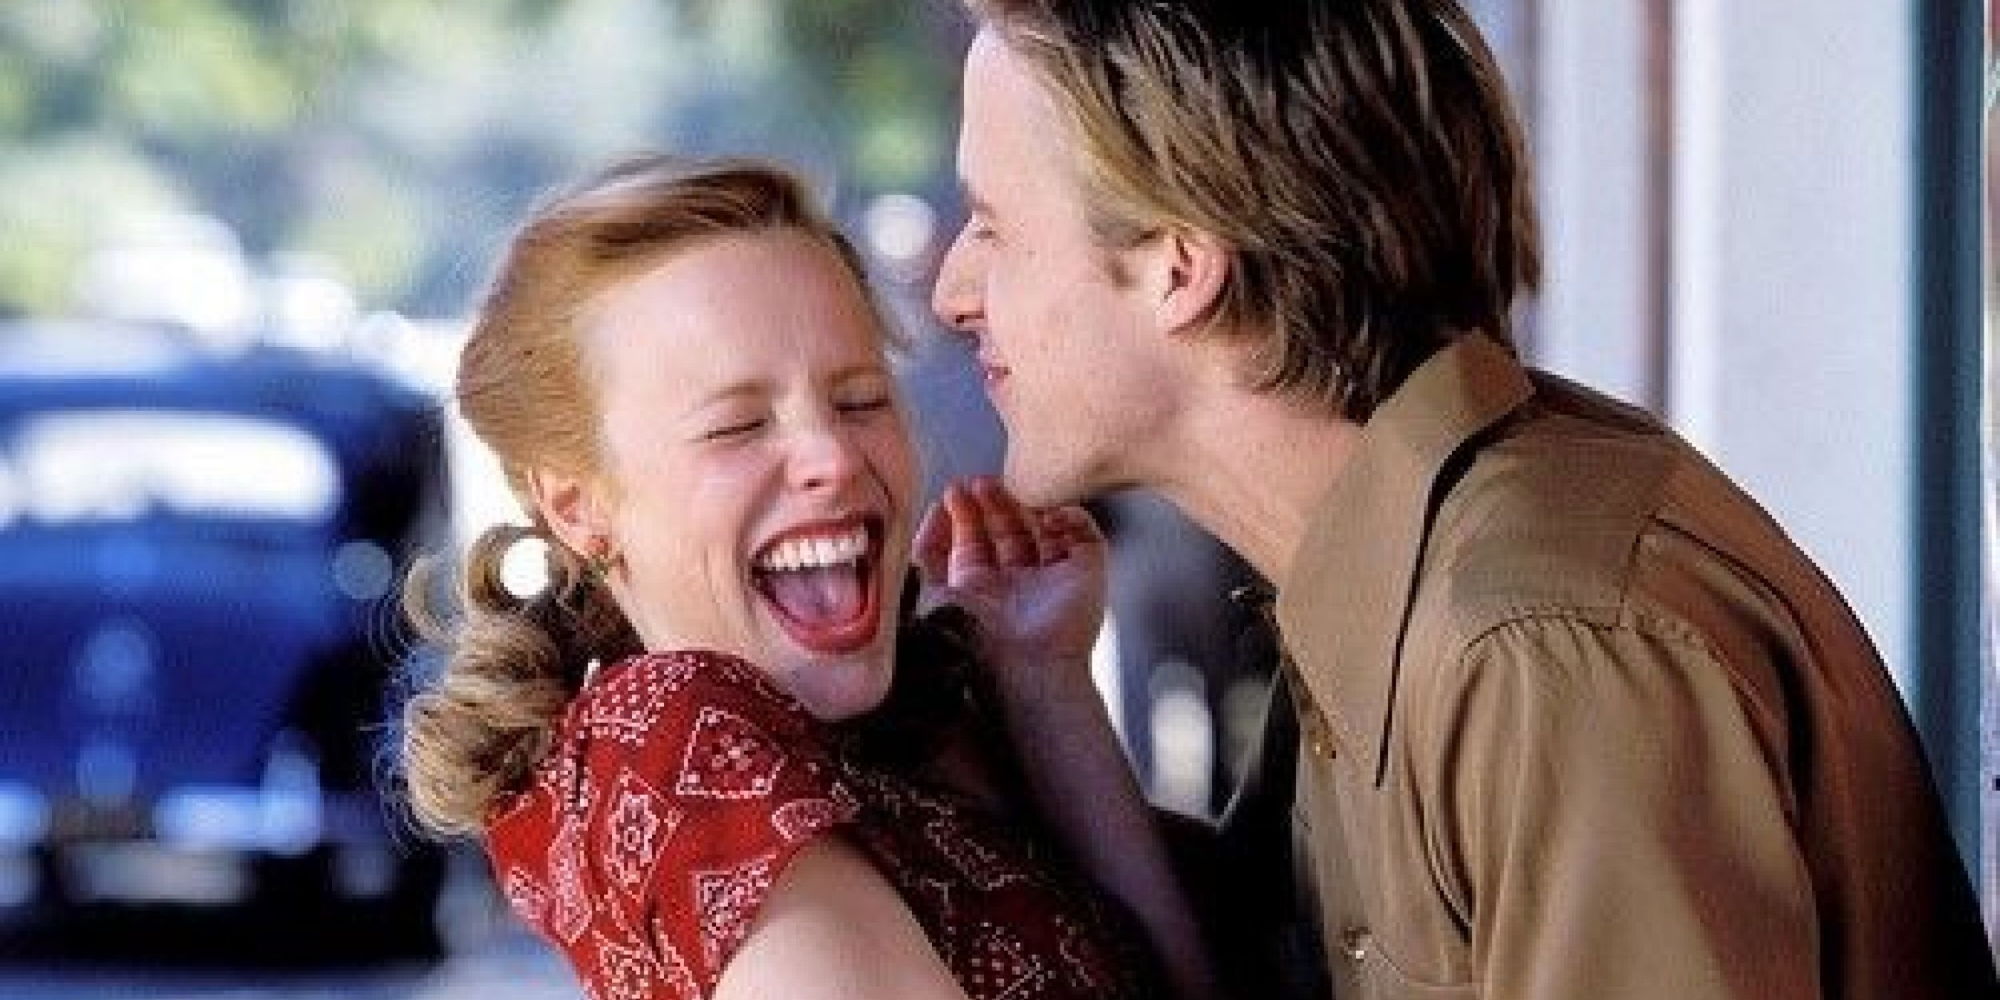 The Notebook promotional image